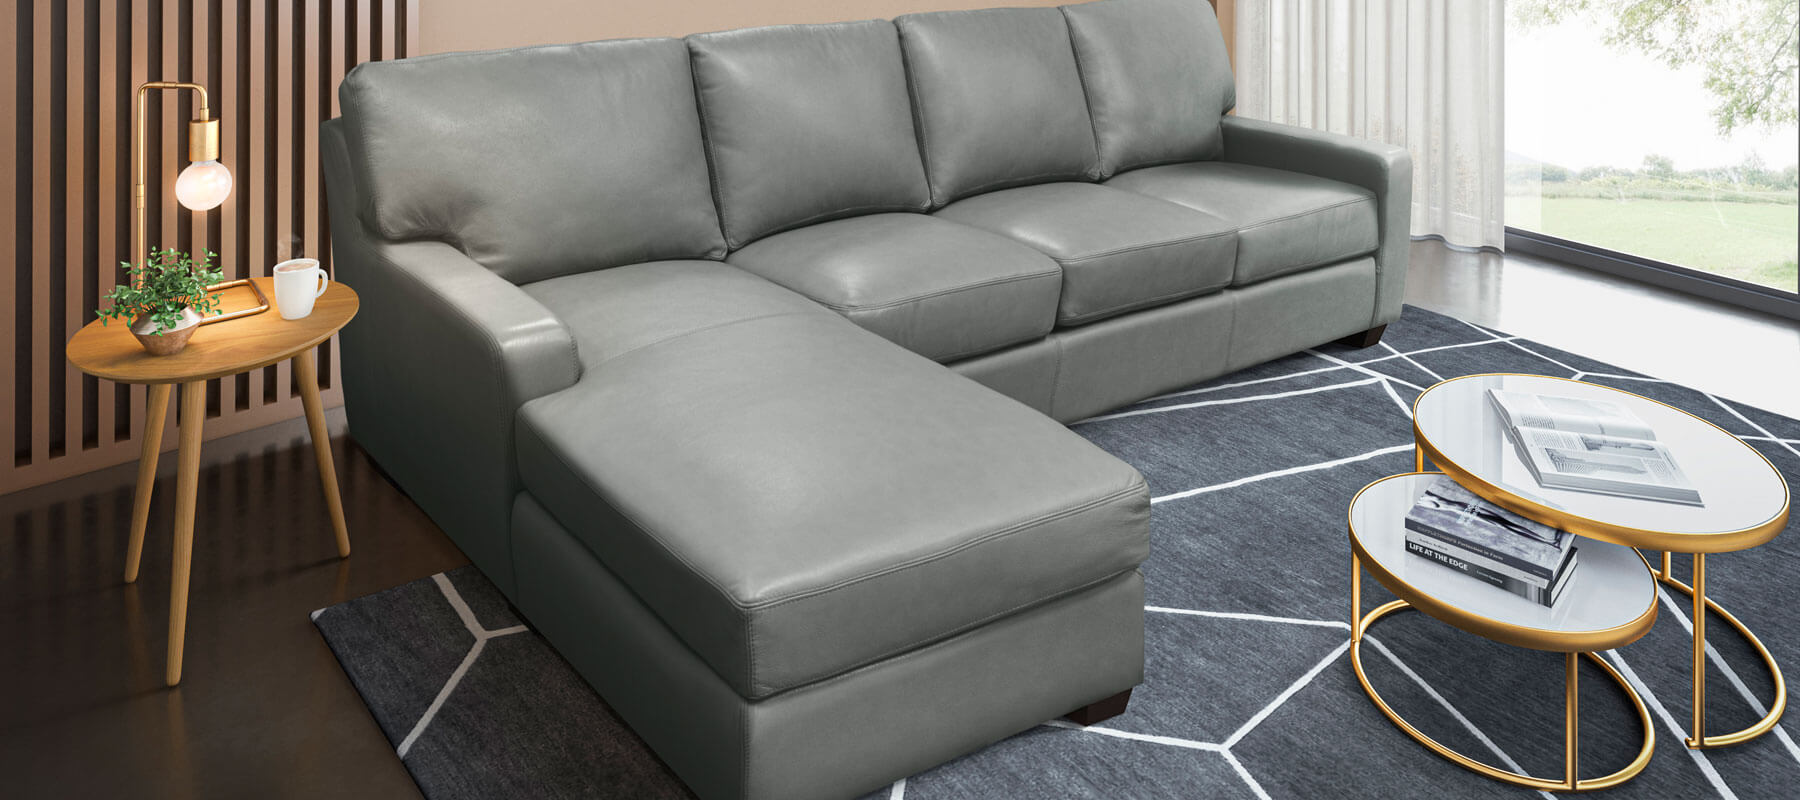 Gray leather sectional by Hayek's Leather Furniture